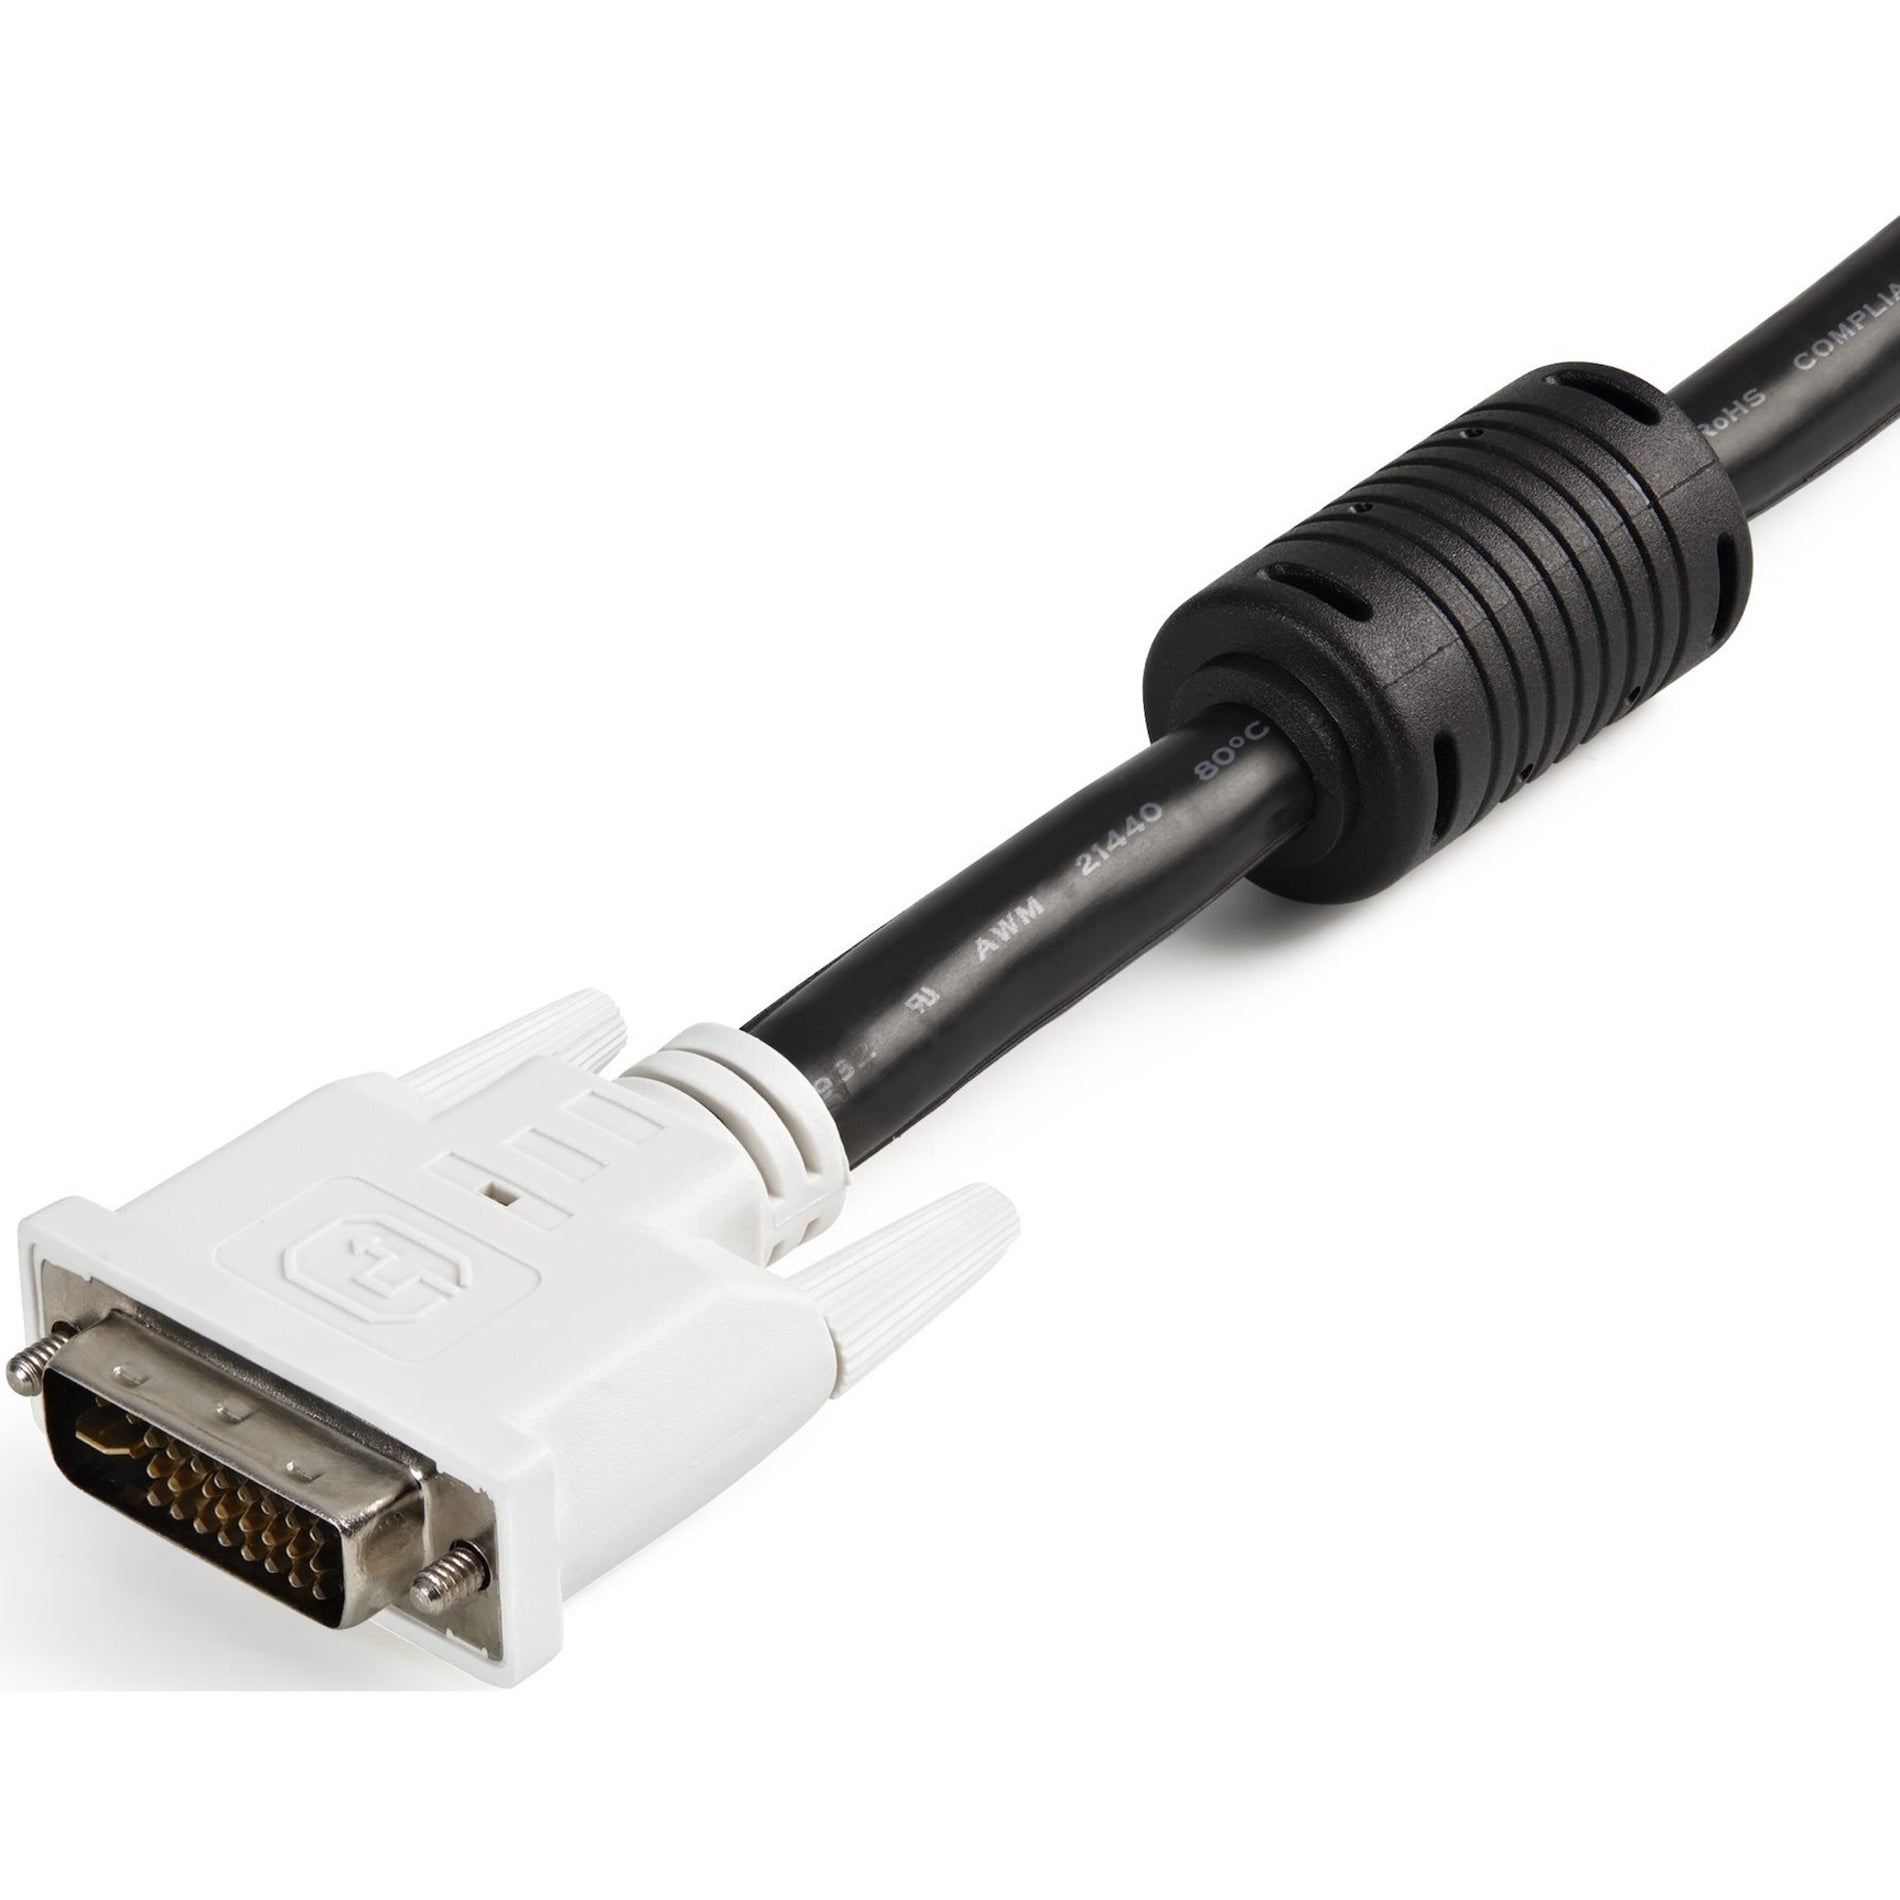 StarTech.com USBDVI4N1A10 10 ft 4-in-1 USB DVI KVM Cable with Audio, Copper Conductor, 1920 x 1200 Supported Resolution, Black